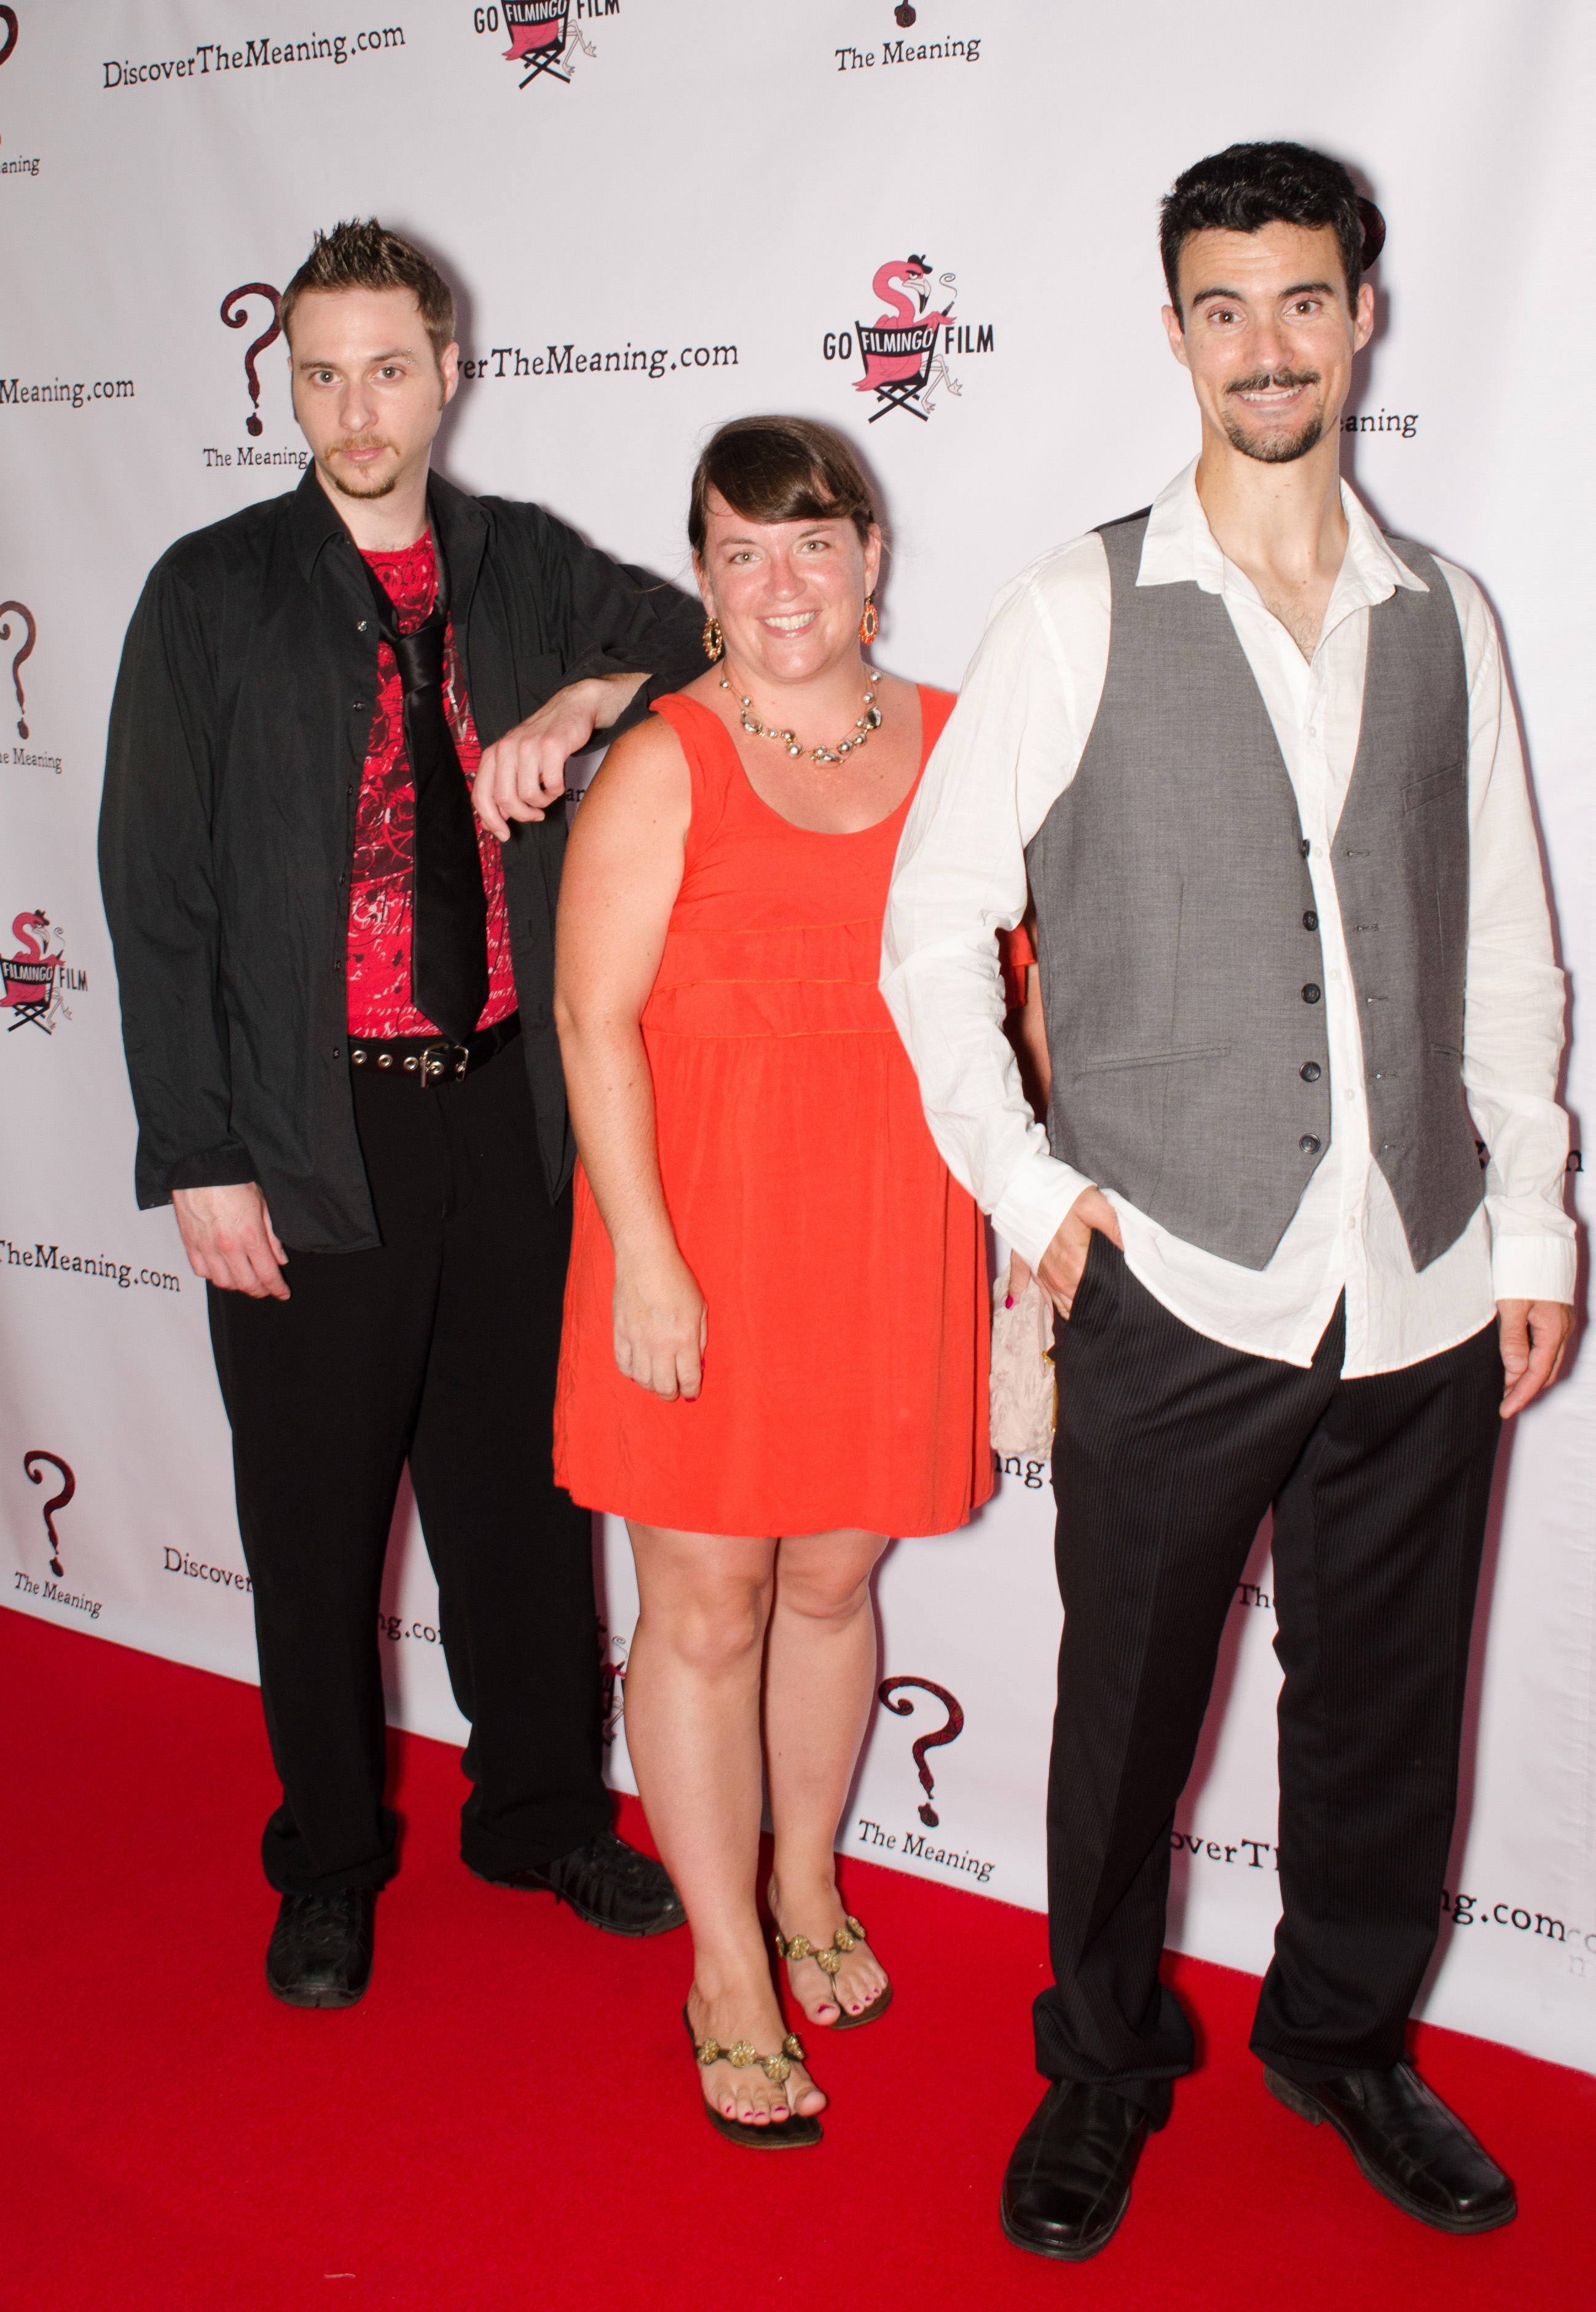 Ian J. Keeney at The Meaning premiere with Patti MacCracken and Paul MacCracken